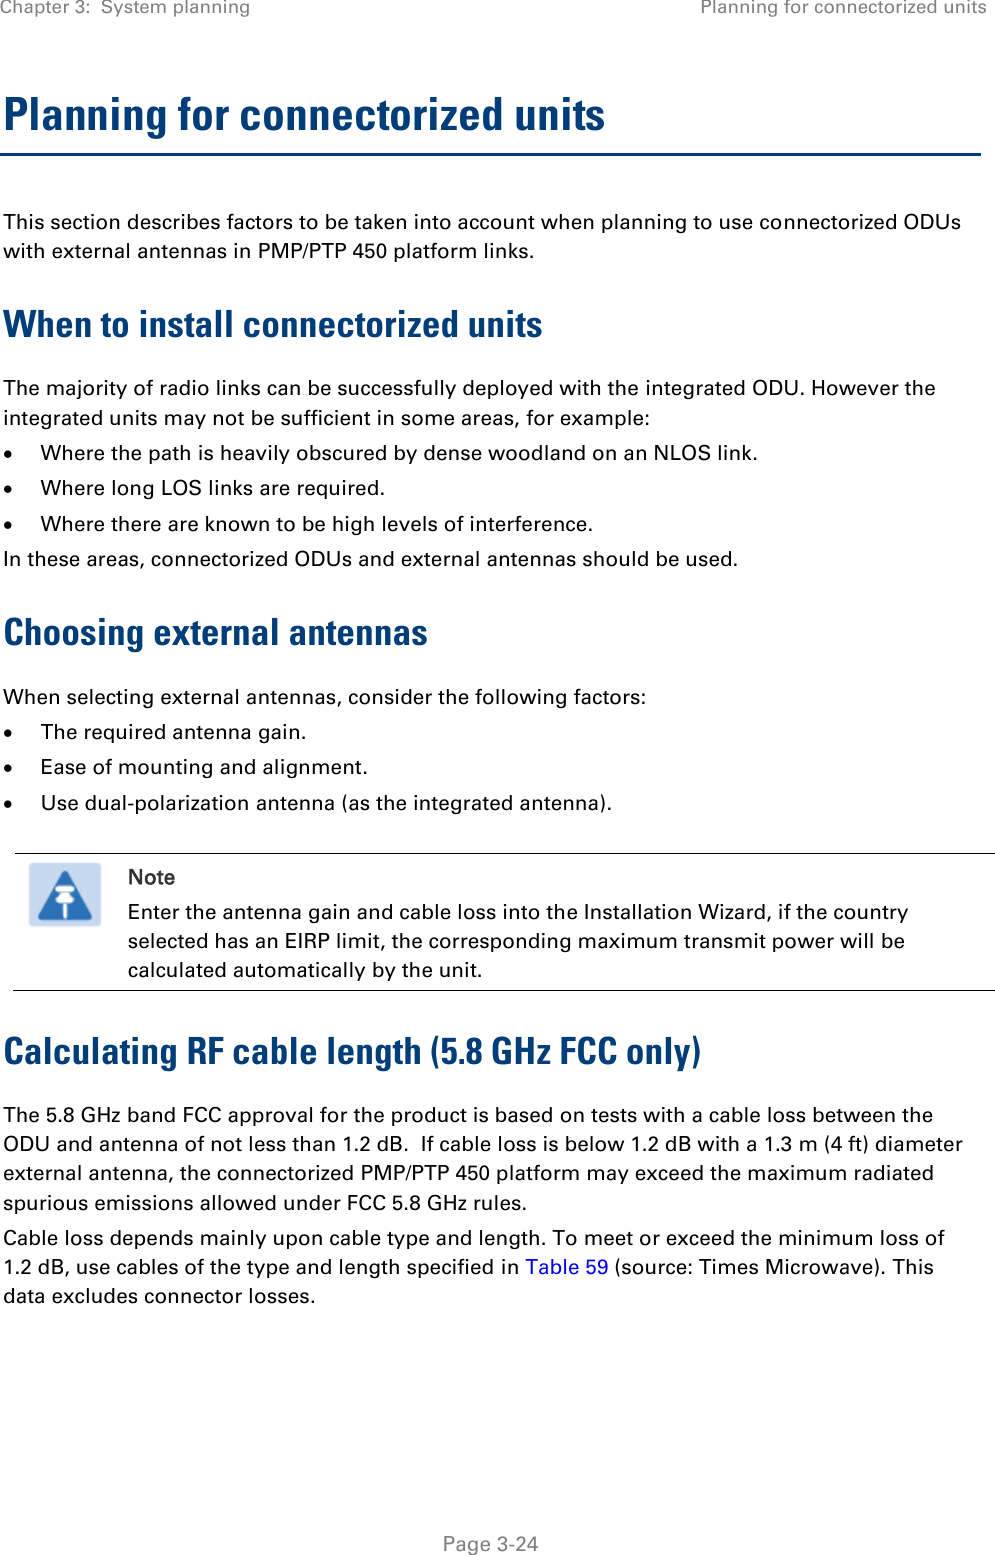 Chapter 3:  System planning Planning for connectorized units   Page 3-24 Planning for connectorized units This section describes factors to be taken into account when planning to use connectorized ODUs with external antennas in PMP/PTP 450 platform links. When to install connectorized units The majority of radio links can be successfully deployed with the integrated ODU. However the integrated units may not be sufficient in some areas, for example:  Where the path is heavily obscured by dense woodland on an NLOS link.  Where long LOS links are required.   Where there are known to be high levels of interference. In these areas, connectorized ODUs and external antennas should be used. Choosing external antennas When selecting external antennas, consider the following factors:  The required antenna gain.  Ease of mounting and alignment.  Use dual-polarization antenna (as the integrated antenna).   Note Enter the antenna gain and cable loss into the Installation Wizard, if the country selected has an EIRP limit, the corresponding maximum transmit power will be calculated automatically by the unit. Calculating RF cable length (5.8 GHz FCC only) The 5.8 GHz band FCC approval for the product is based on tests with a cable loss between the ODU and antenna of not less than 1.2 dB.  If cable loss is below 1.2 dB with a 1.3 m (4 ft) diameter external antenna, the connectorized PMP/PTP 450 platform may exceed the maximum radiated spurious emissions allowed under FCC 5.8 GHz rules. Cable loss depends mainly upon cable type and length. To meet or exceed the minimum loss of 1.2 dB, use cables of the type and length specified in Table 59 (source: Times Microwave). This data excludes connector losses.  